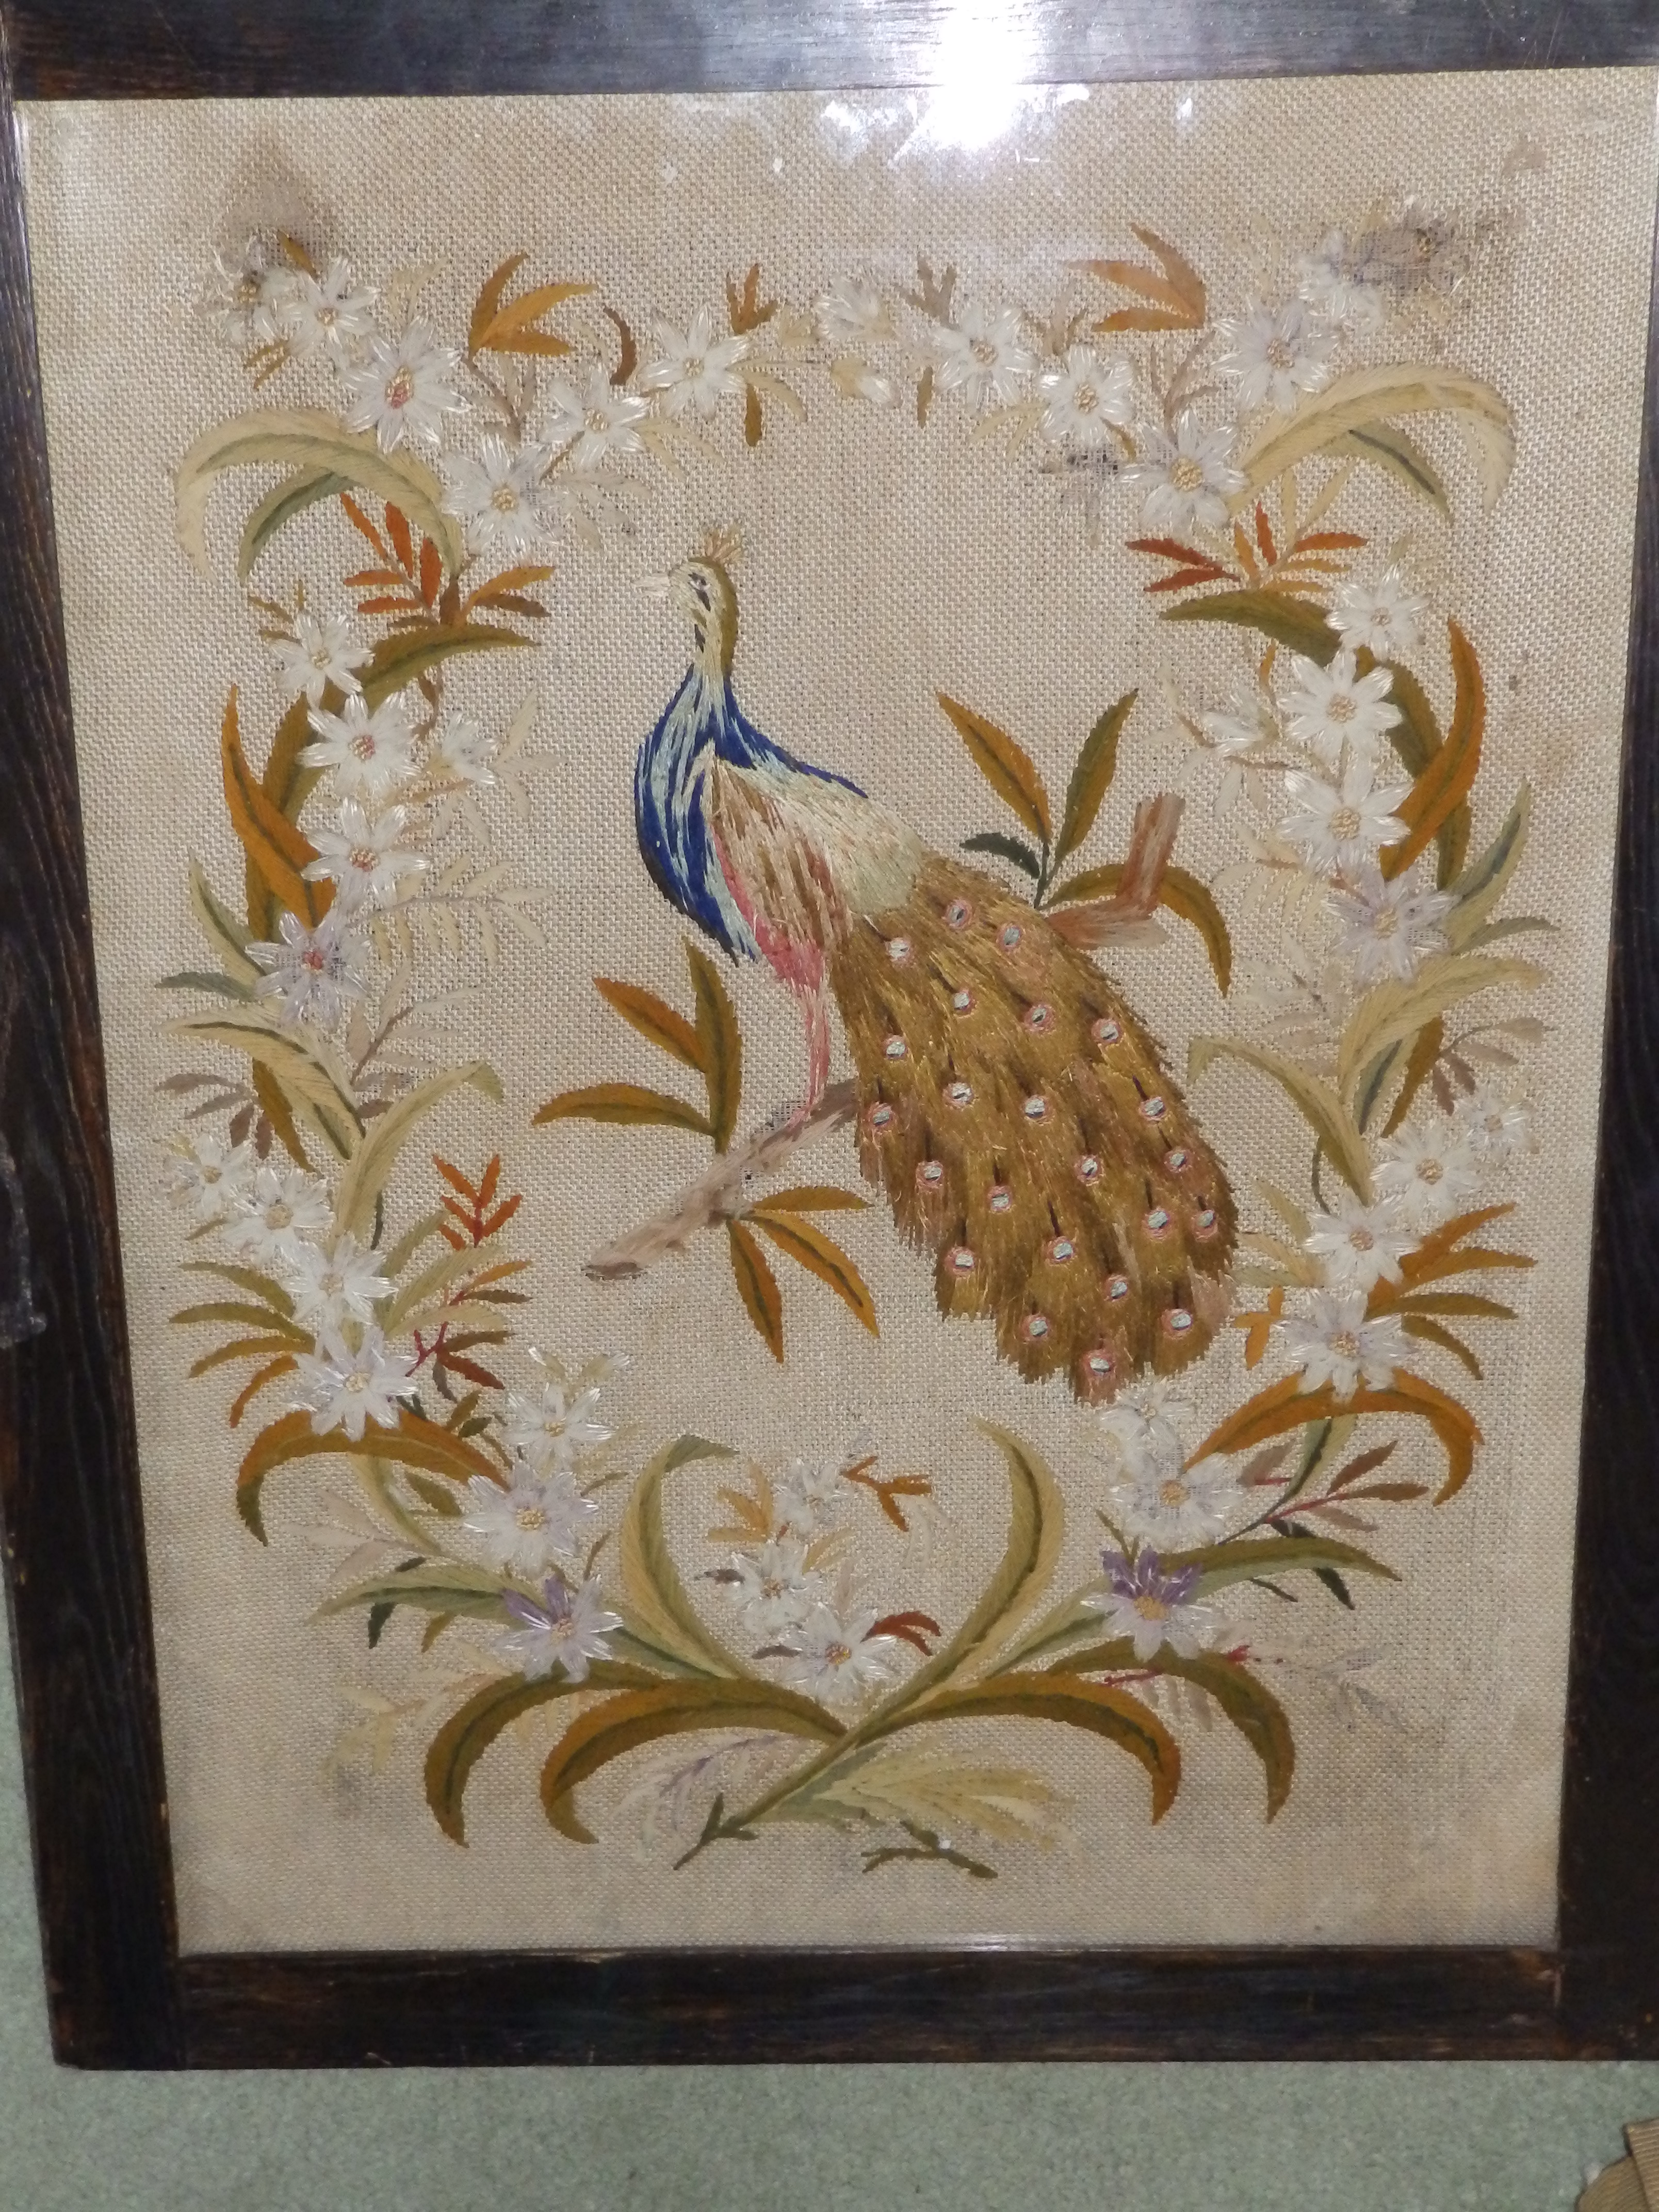 An embroidered silk panel depicting a peacock